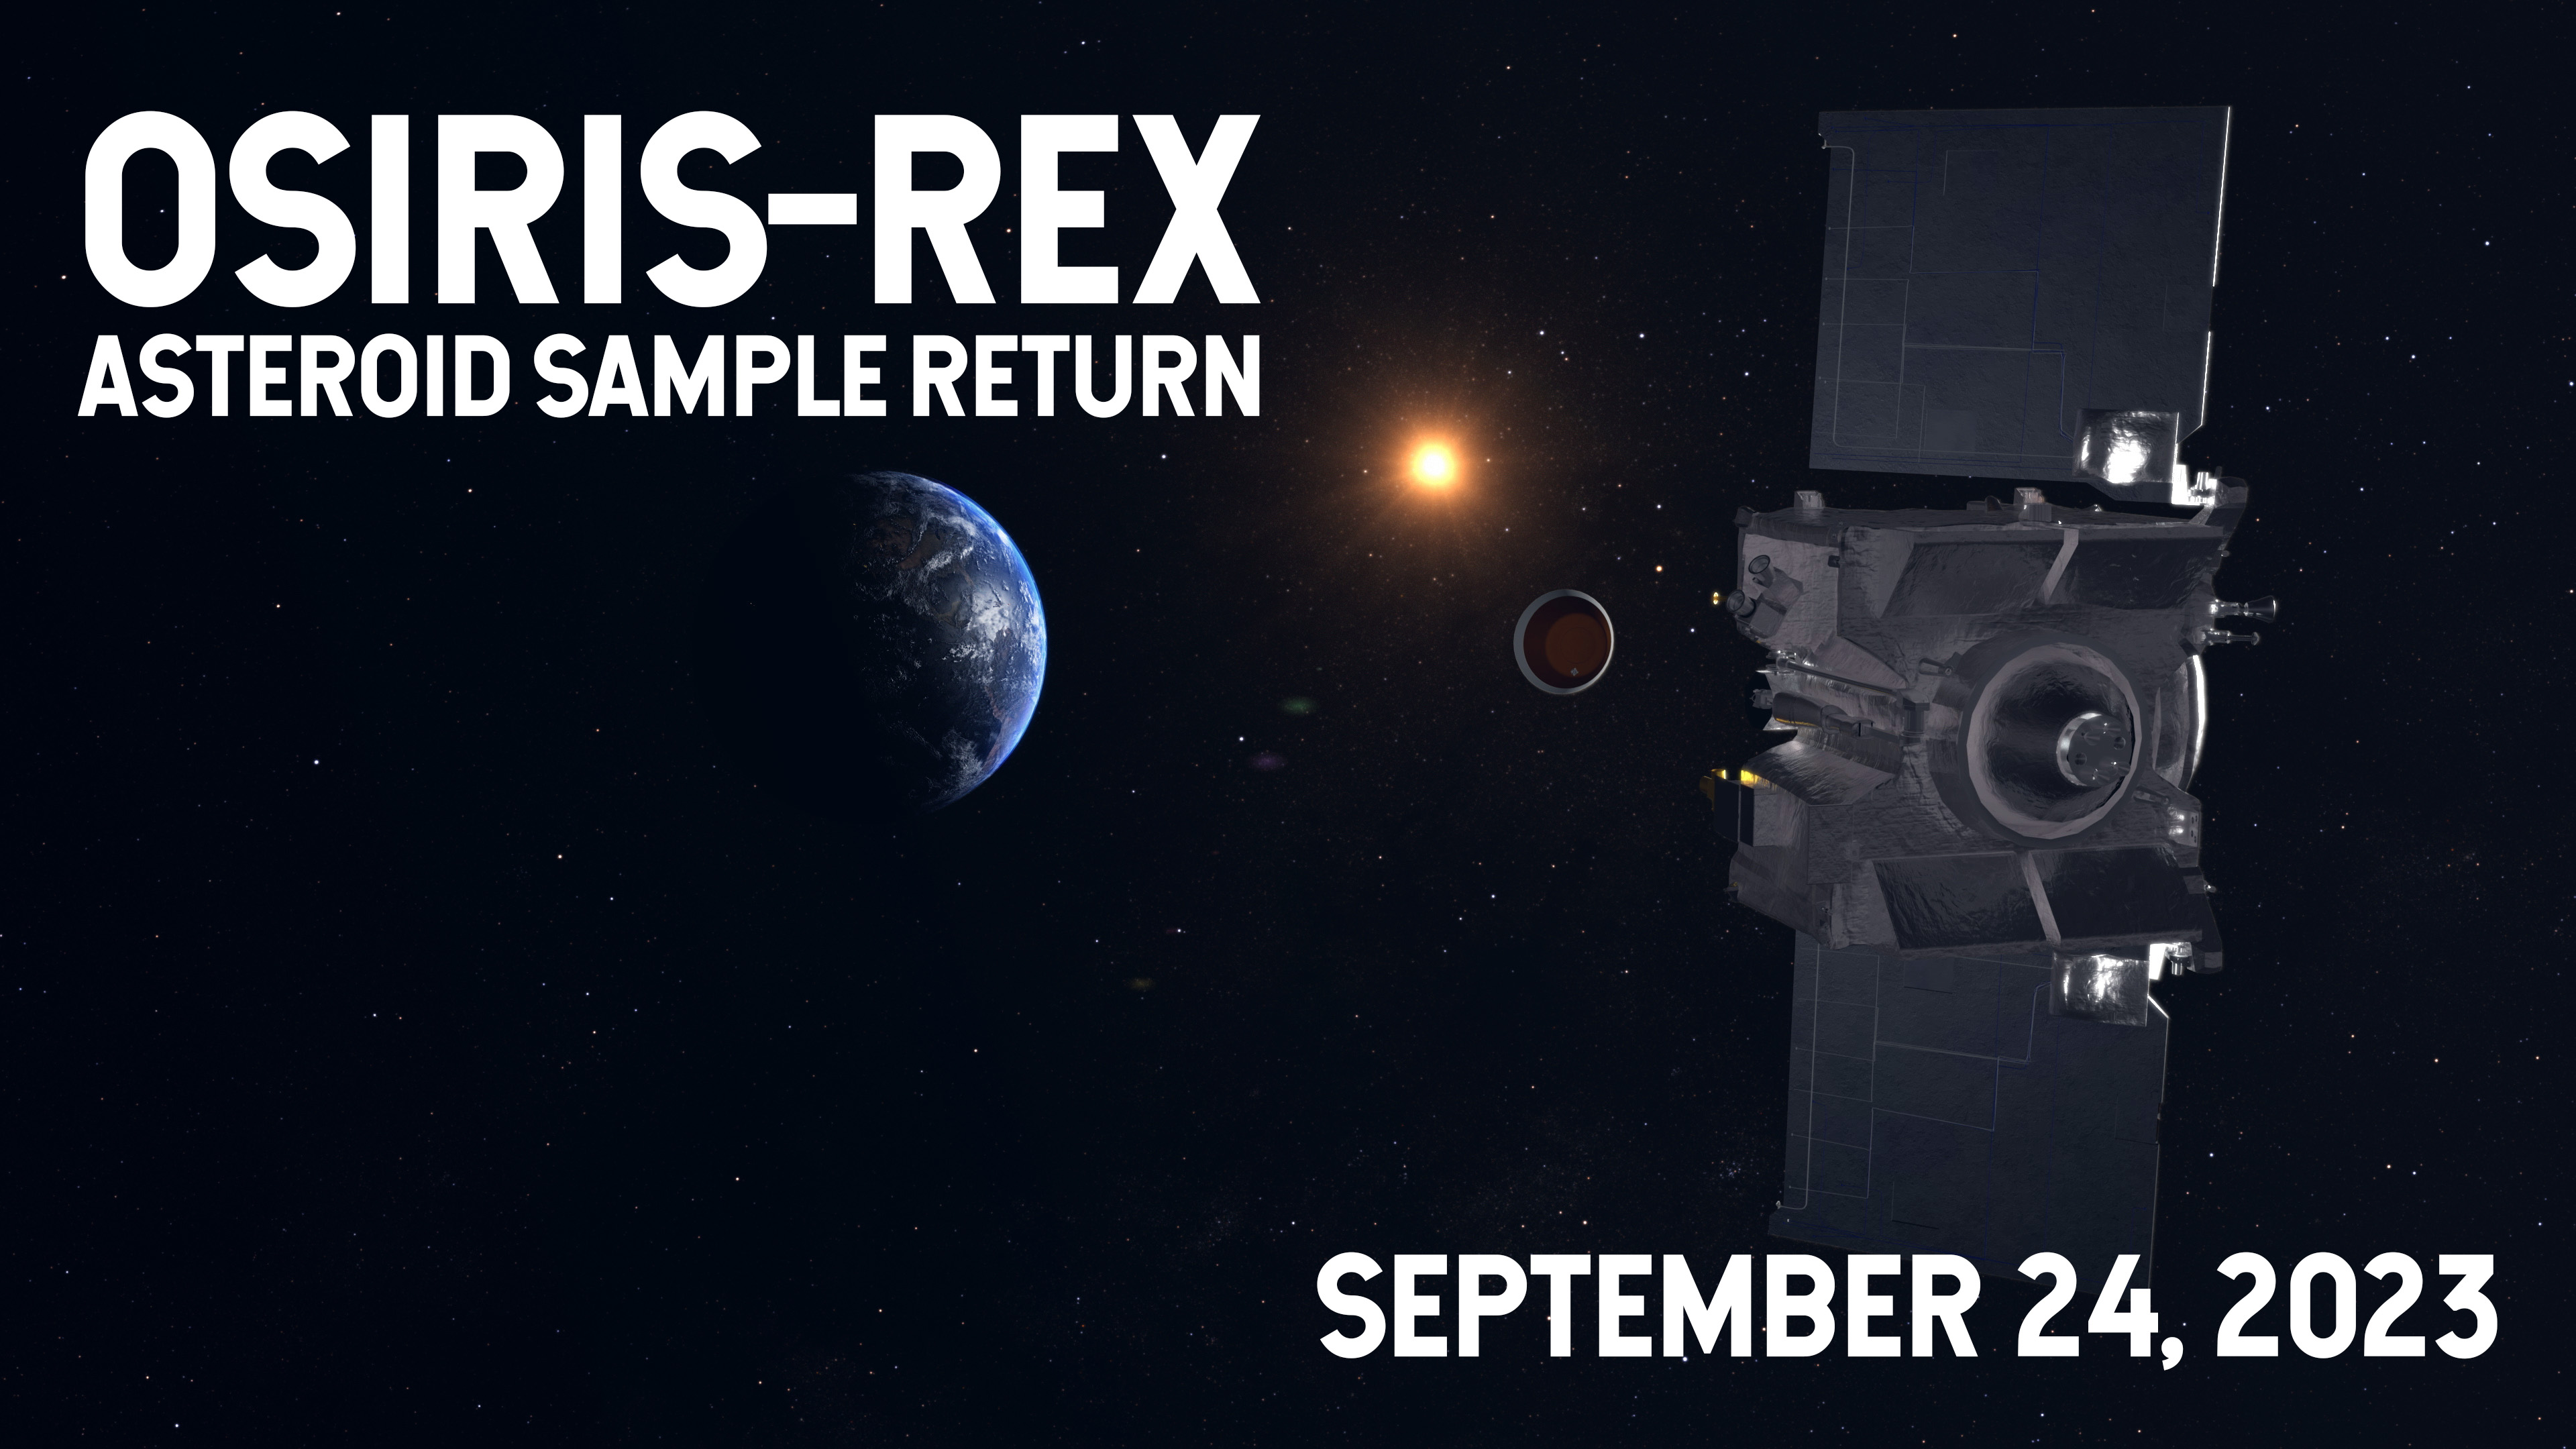 Illustration of a spacecraft dropping off a sample capsule at Earth. The text over the illustration says: OSIRIS-REX Asteroid Sample Return, September 24, 2023